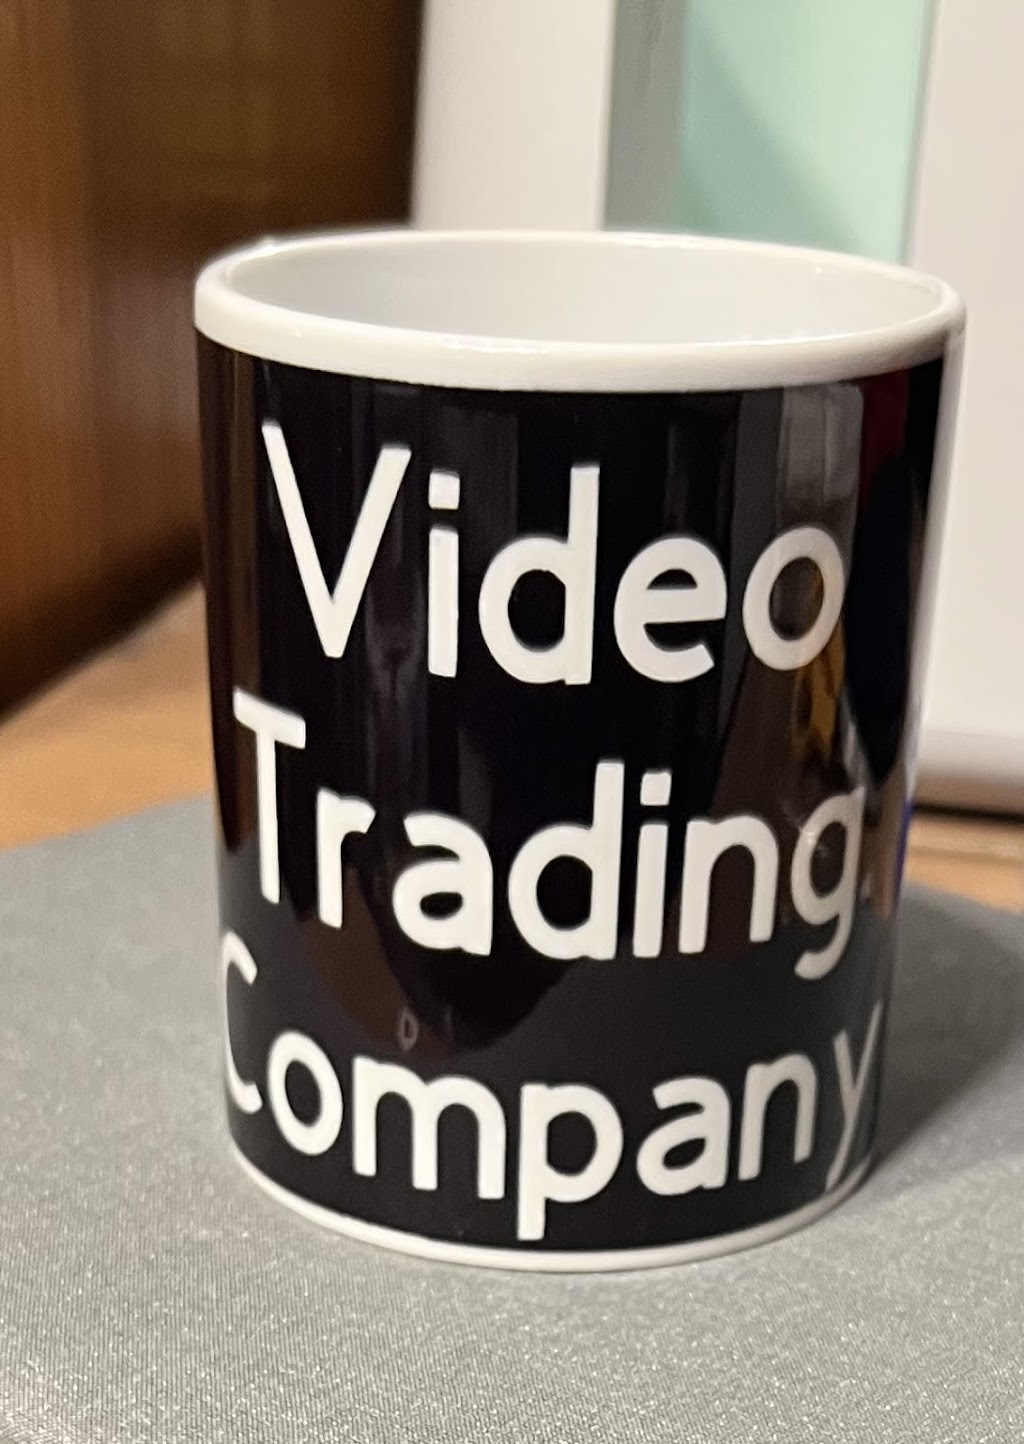 Video Trading Co | 1920C Old W Main St #2233, Red Wing, MN 55066, USA | Phone: (651) 388-5458